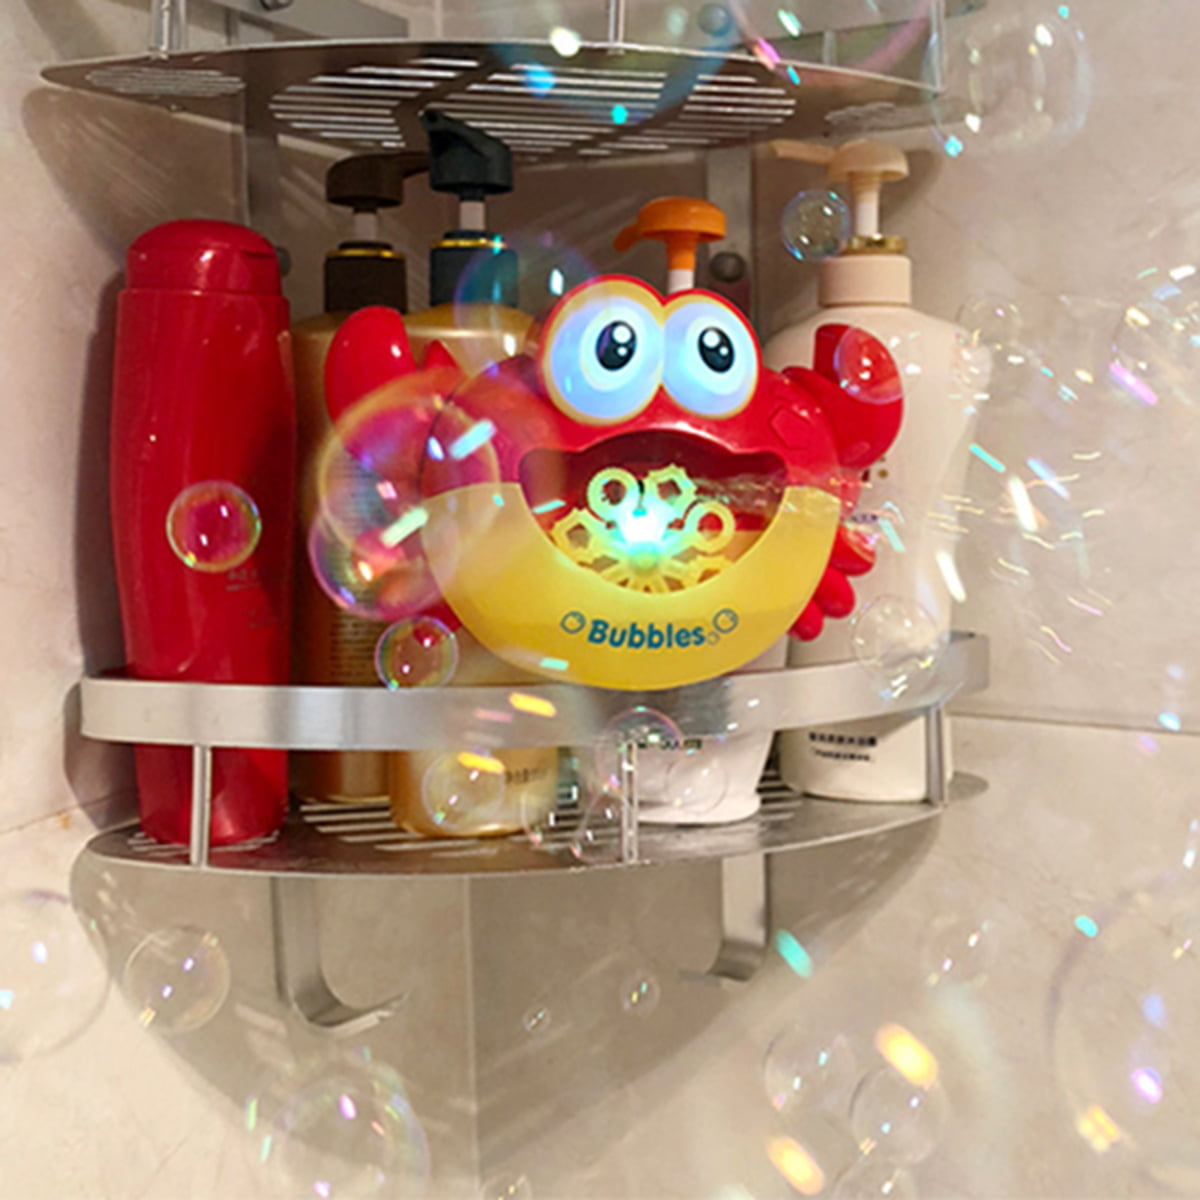 Bubble Machine Crab Automatic Bubble Maker Flashing lights Musical Bath Toy Baby 